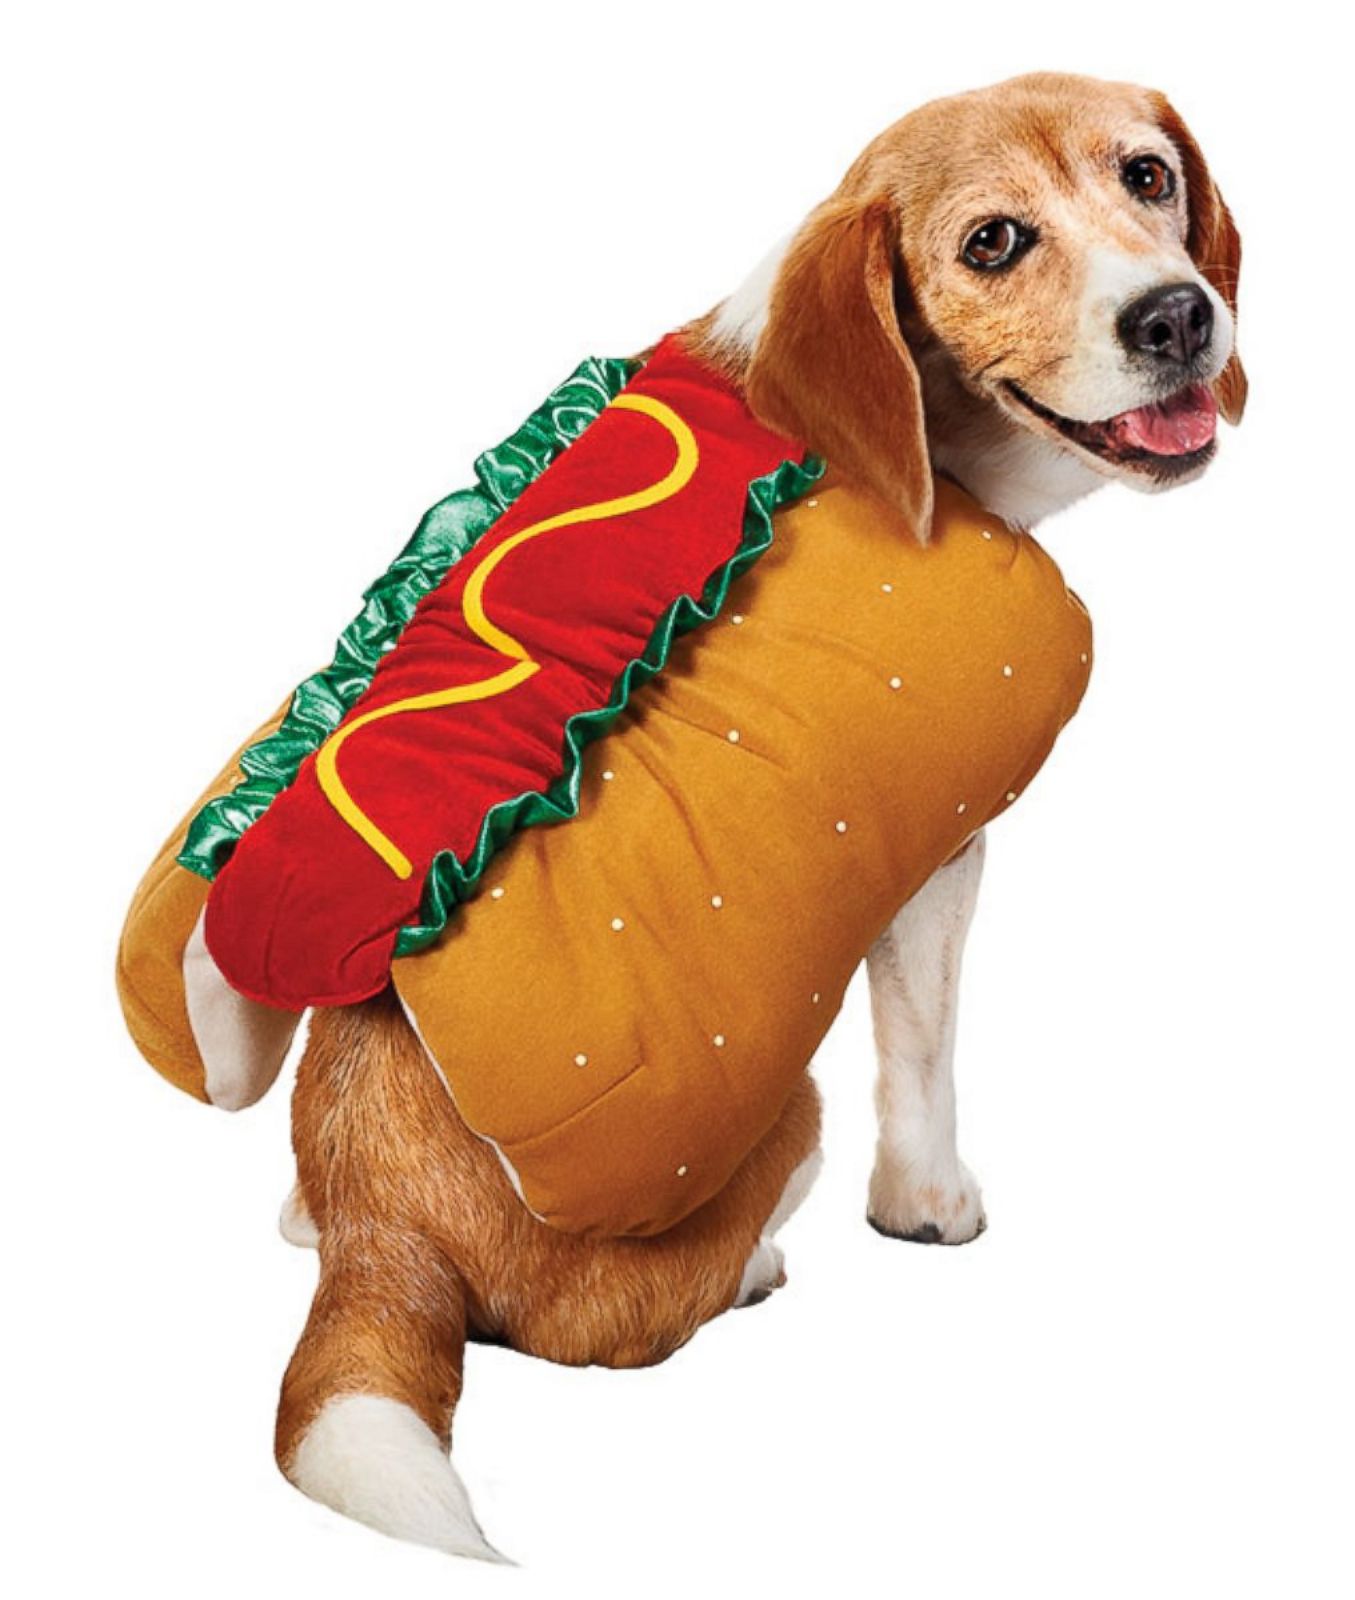 Hot Dog Picture | Halloween Costumes for Pets - ABC News